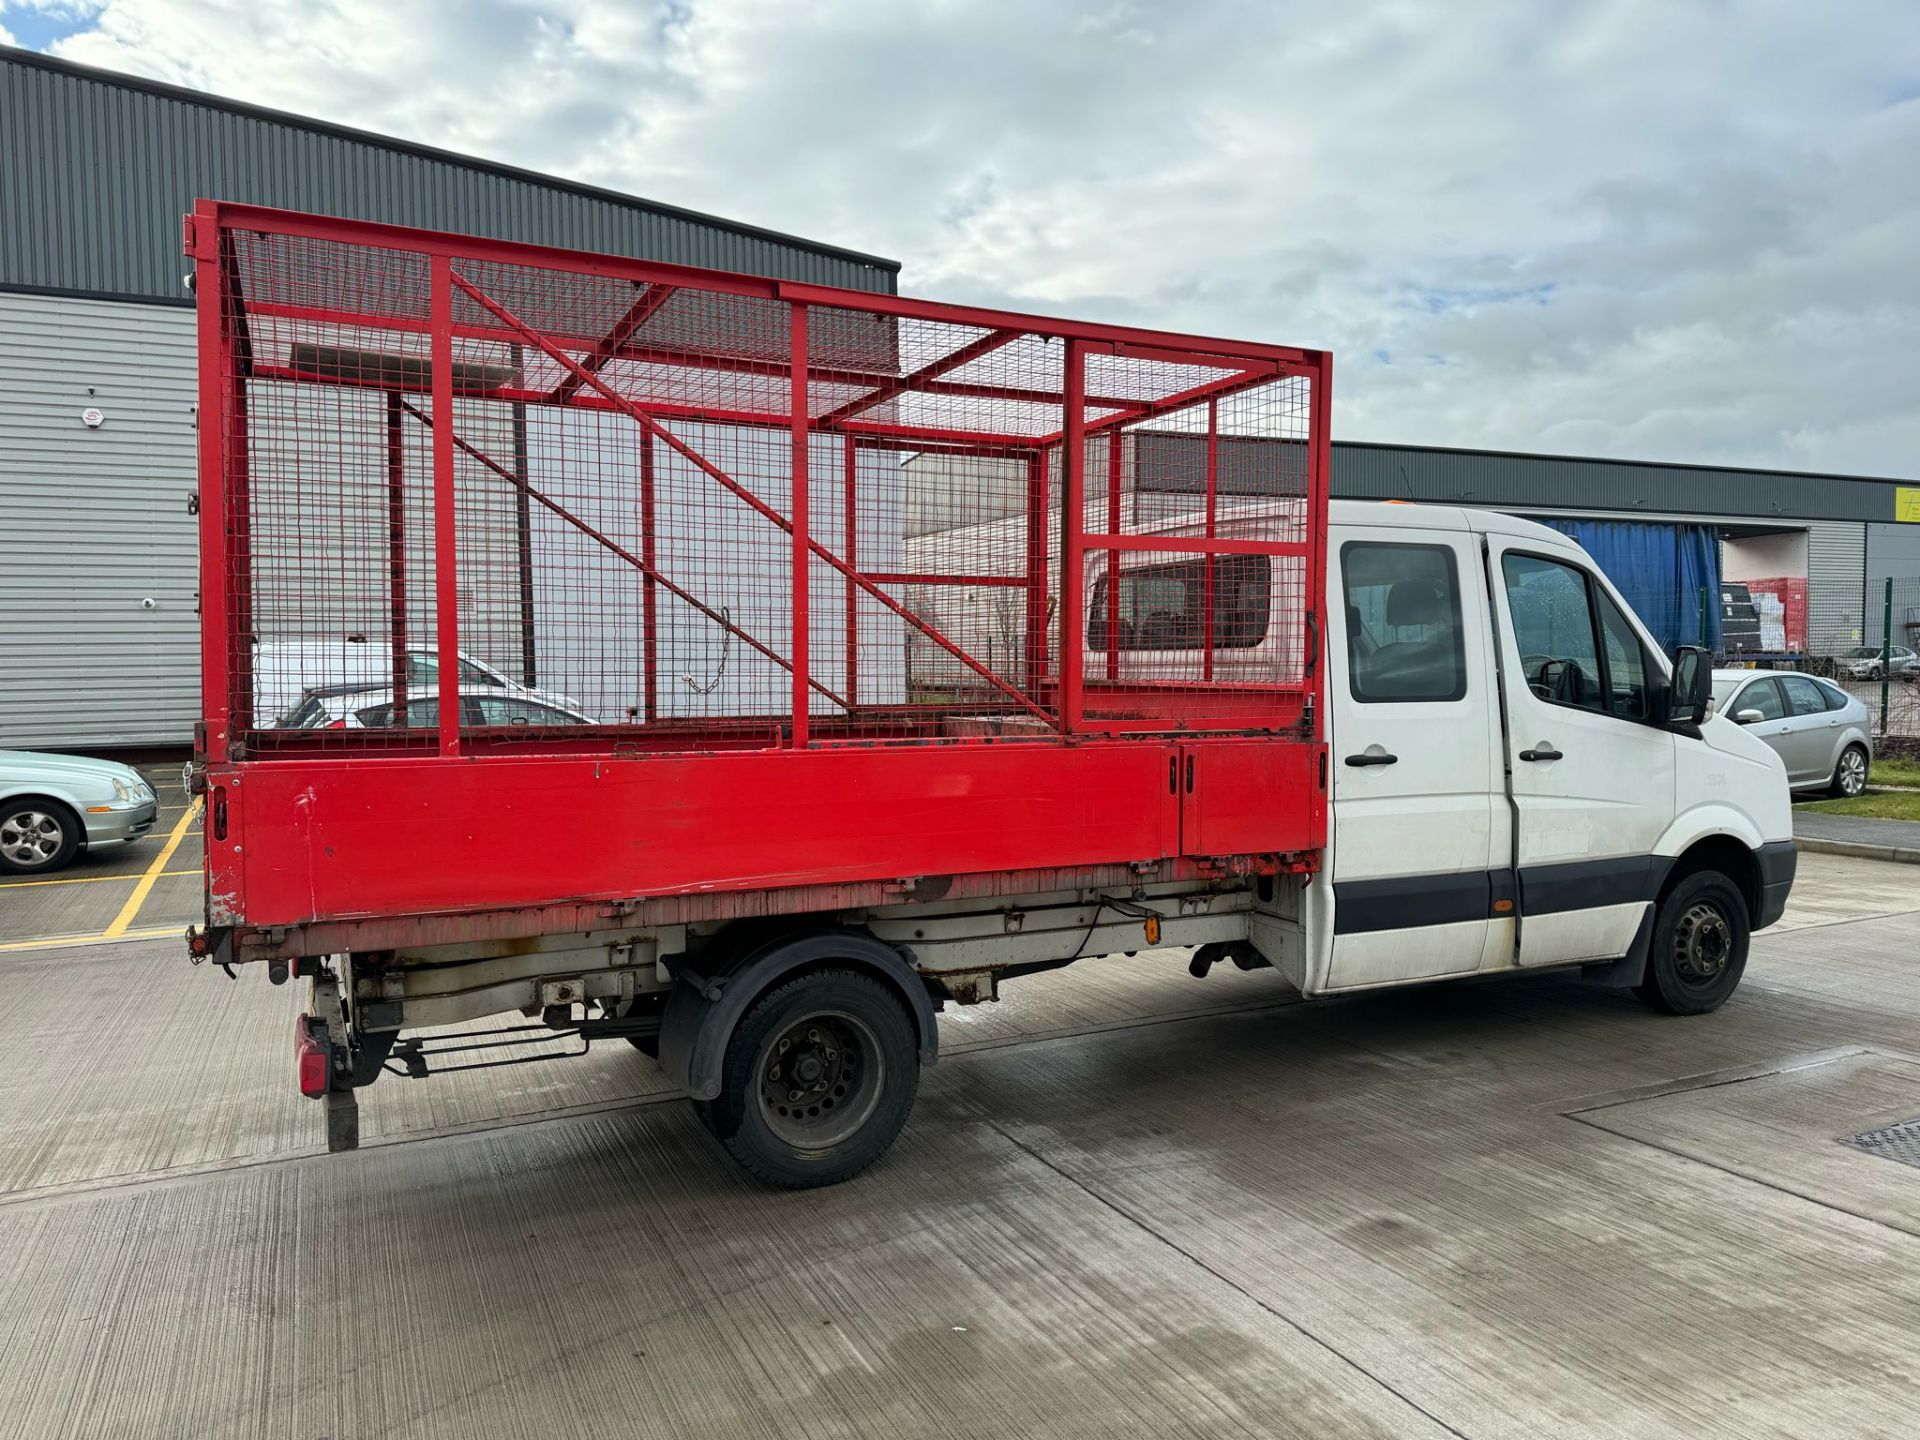 2013 - Volkswagen Crafter, Caged Tipper (Ex-Council Owned & Maintained) - Image 13 of 25